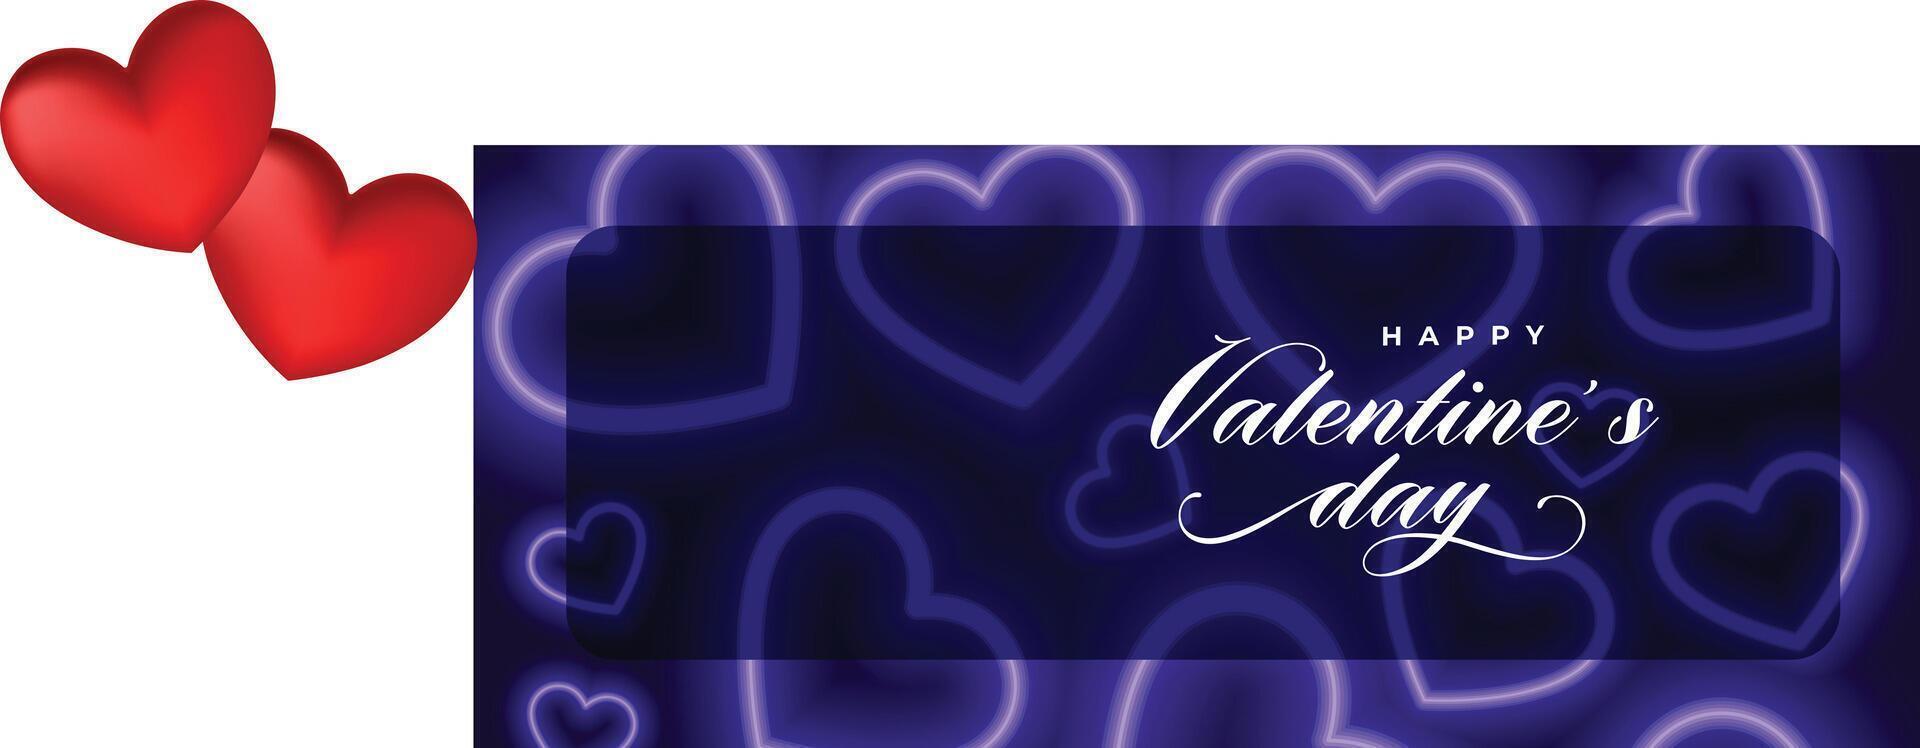 decorative valentines day celebration banner with 3d love hearts vector